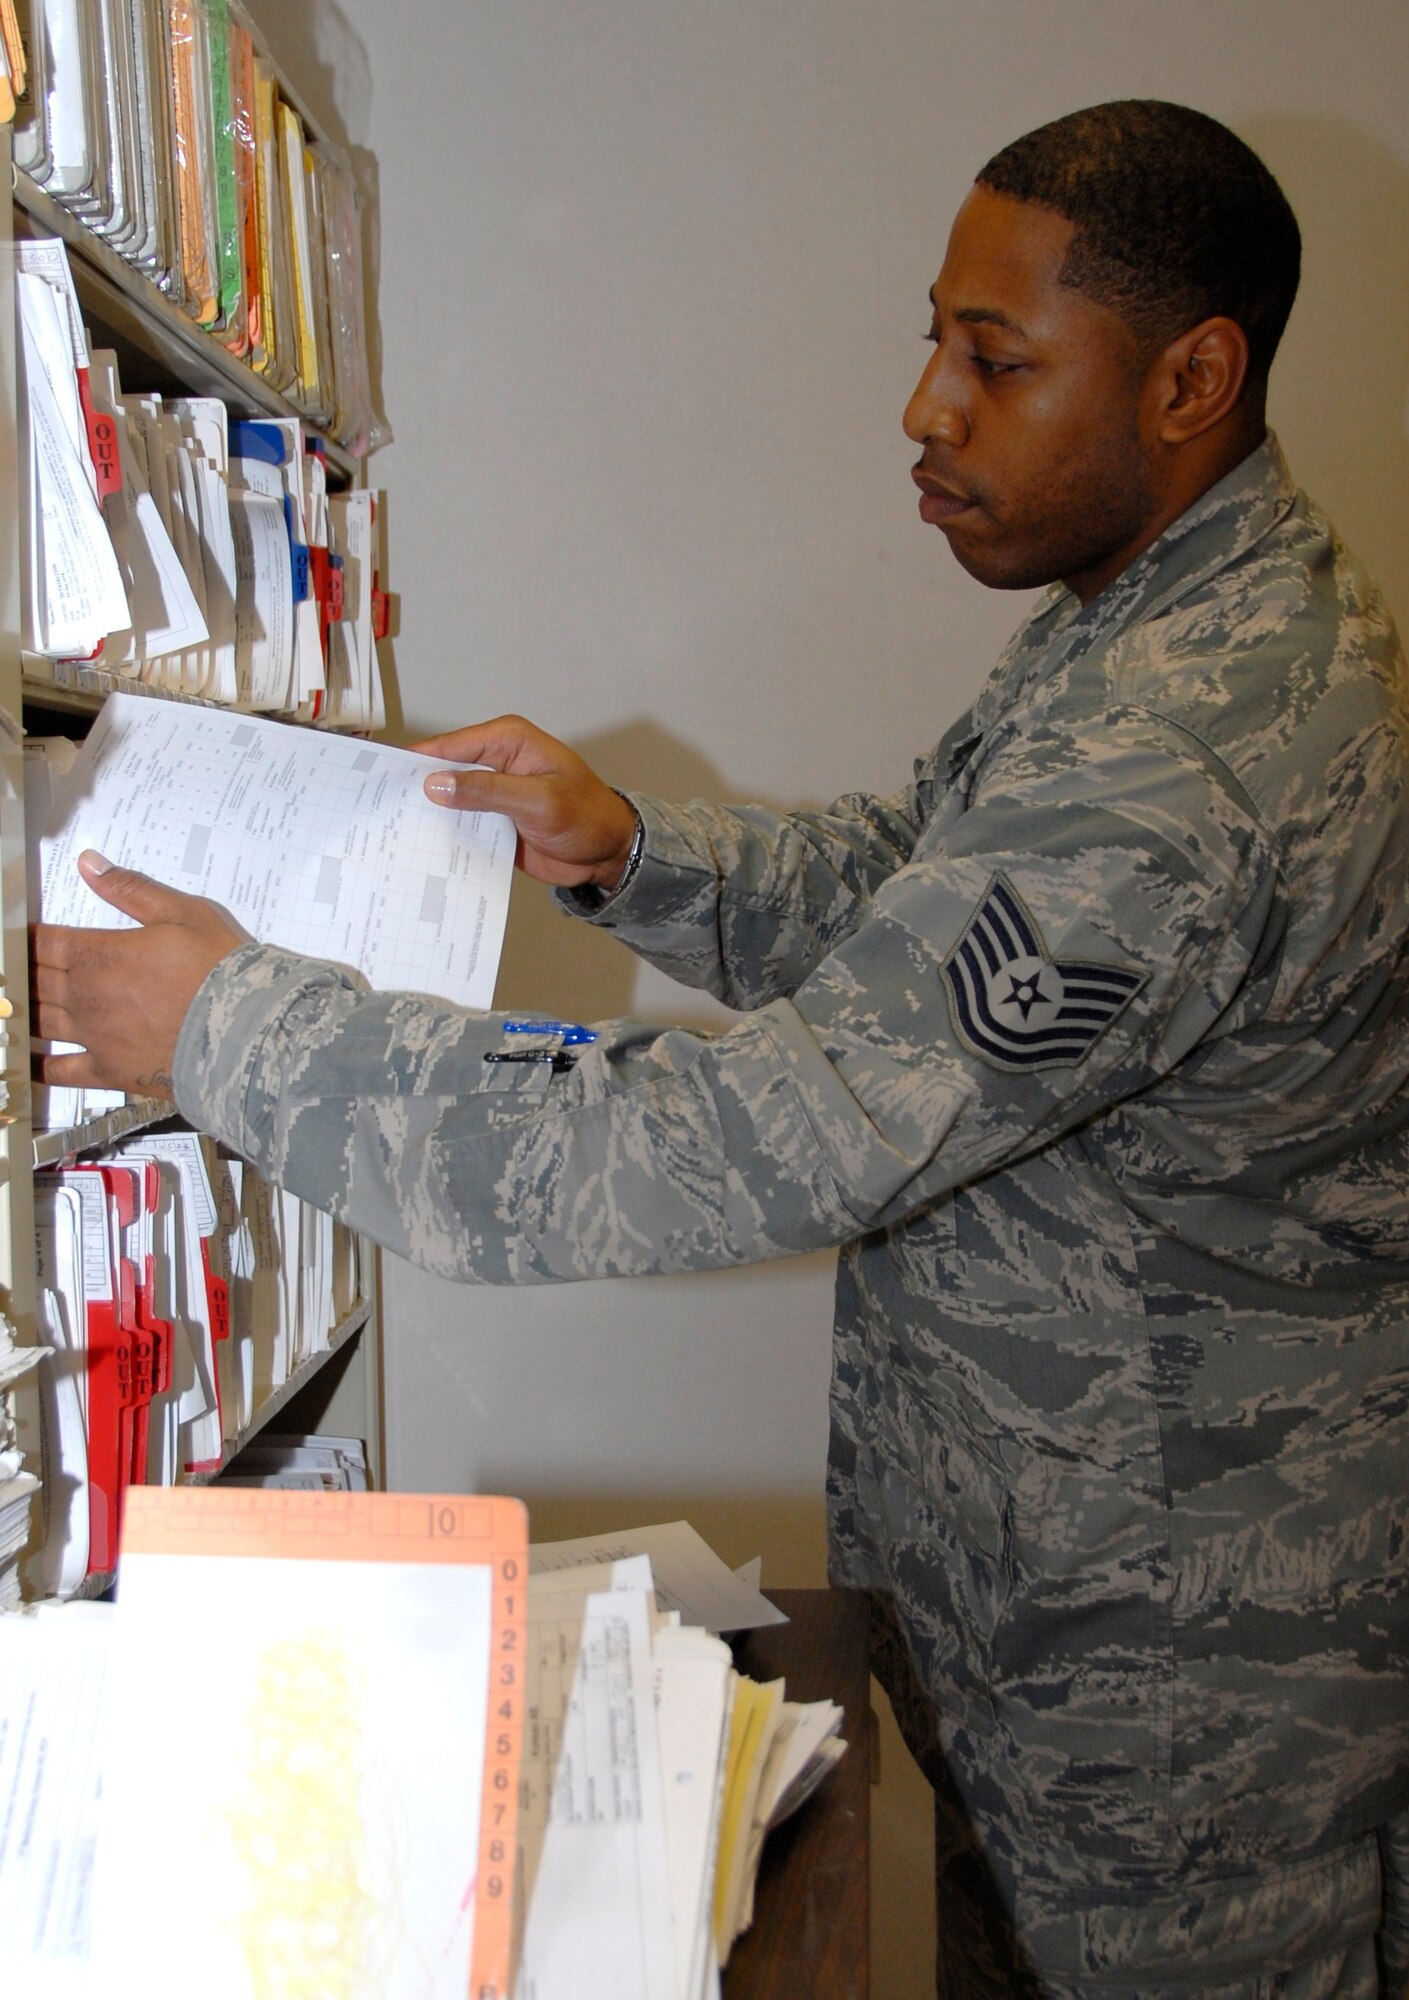 KUNSAN AIR BASE, Republic of Korea -- Tech. Sgt. Daniel Johnson, 8th Medical Support Squadron NCO in charge of records, files records by terminal-digit order. The outpatient records element is part of the 8th MDSS business operations and beneficiary information systems flight. (U.S. Air Force photo/Staff Sgt. Amanda Savannah)